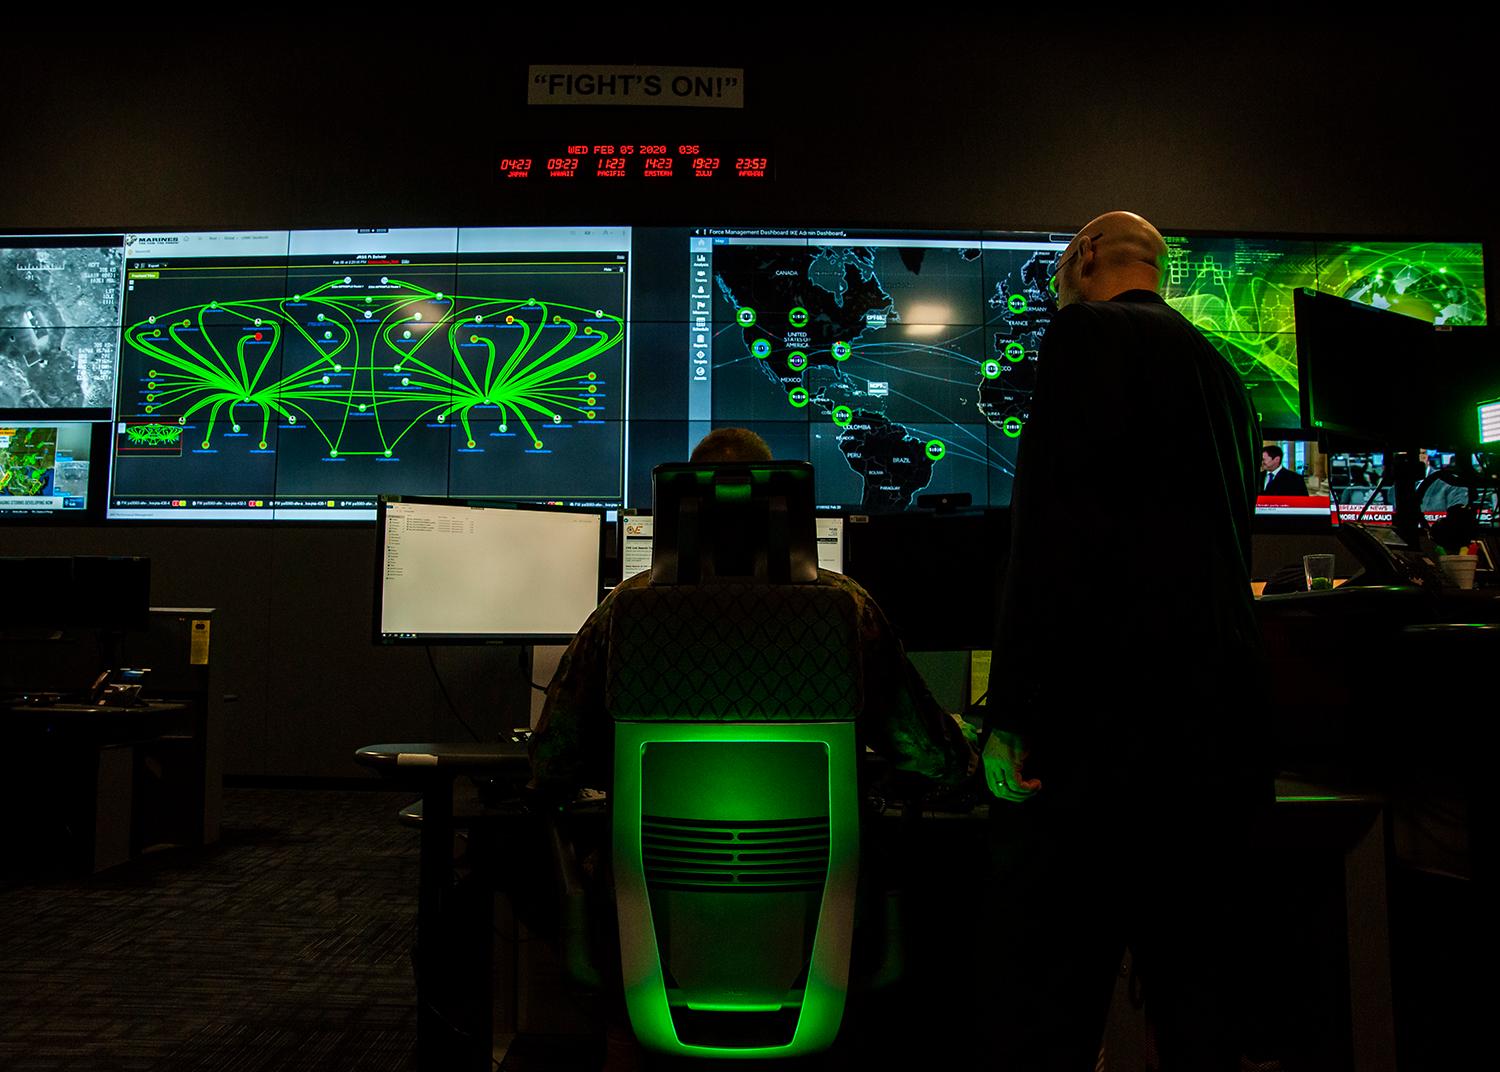 Cybersecurity personnel work in a cyber operations center